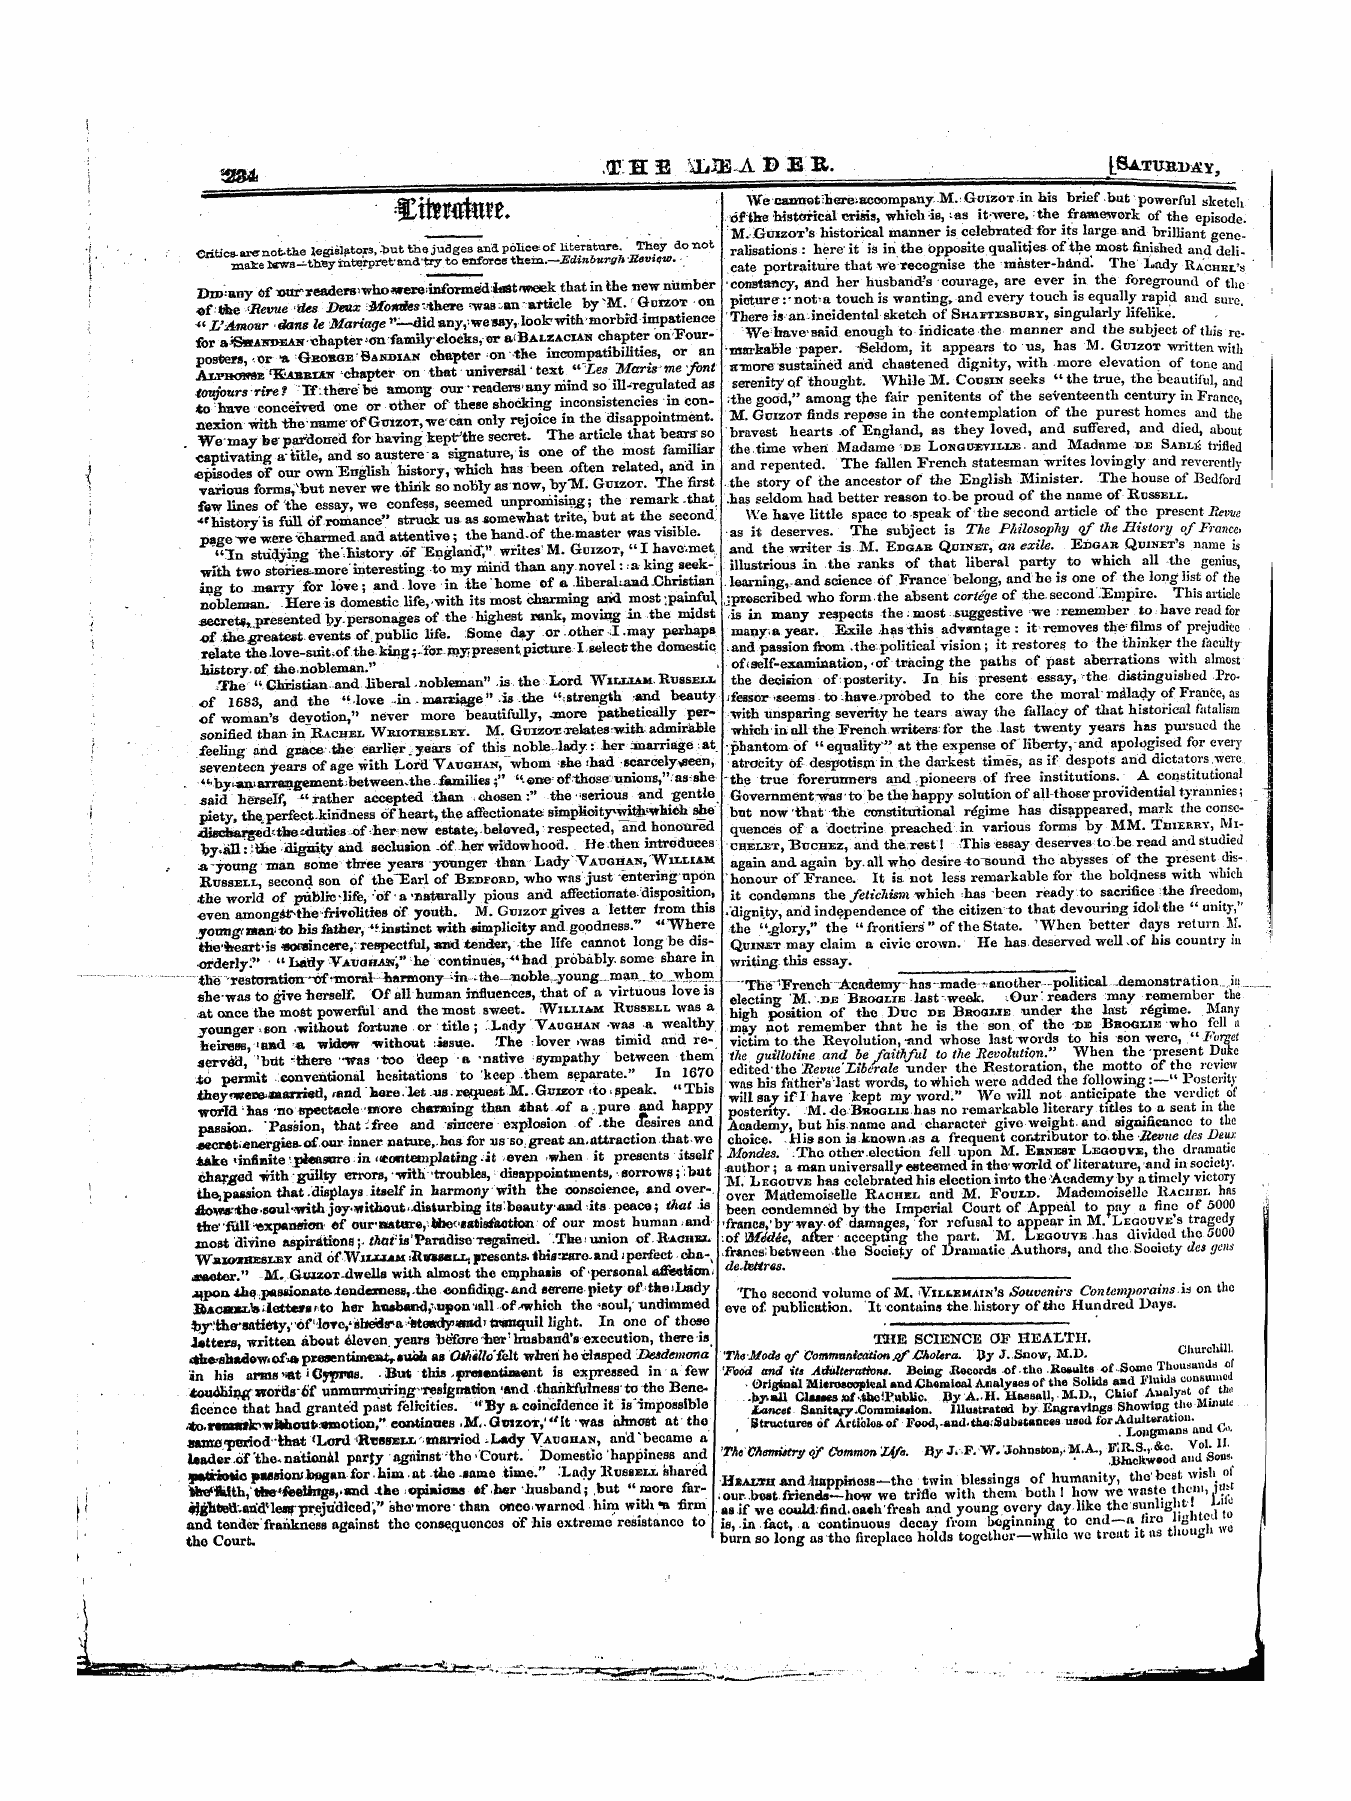 Leader (1850-1860): jS F Y, 1st edition: 18